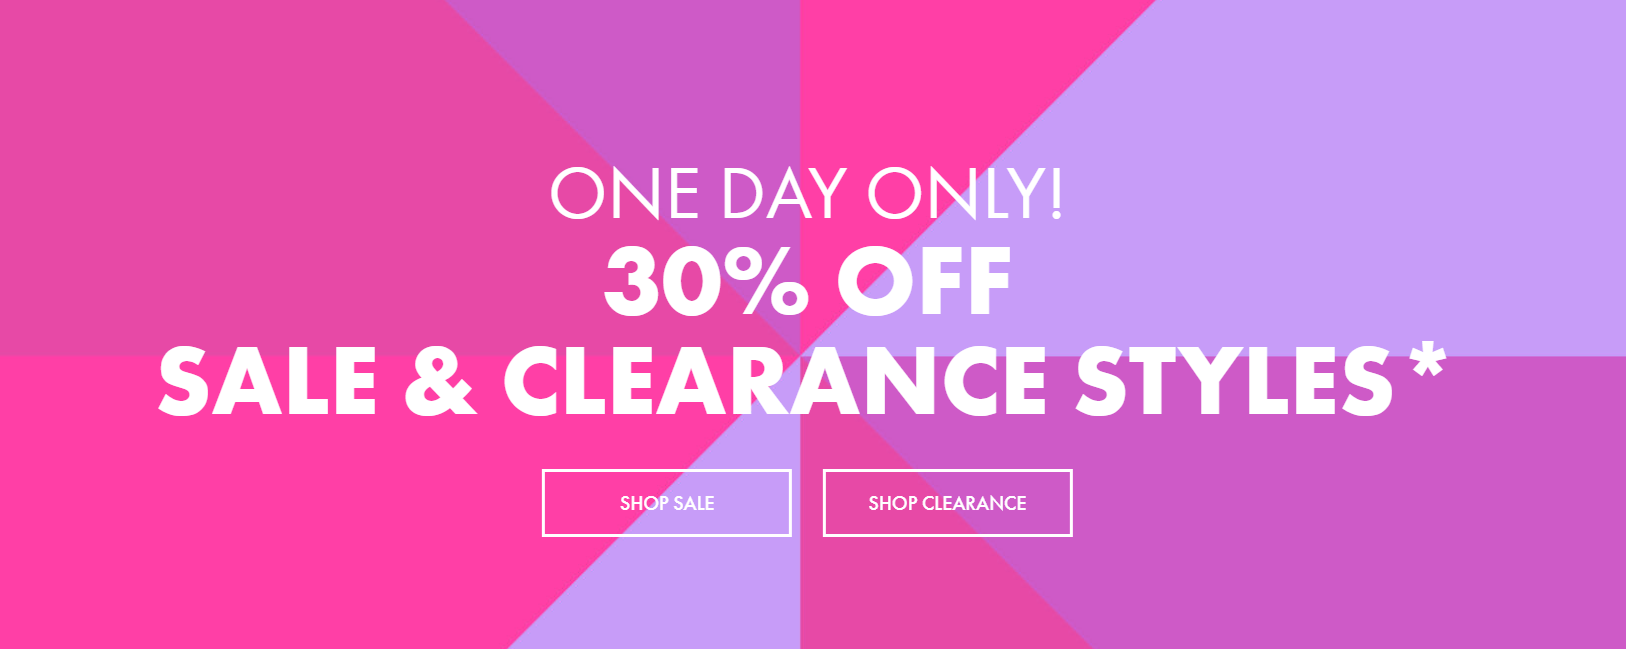 1 Day sale - 30% OFF on sale & clearance styles